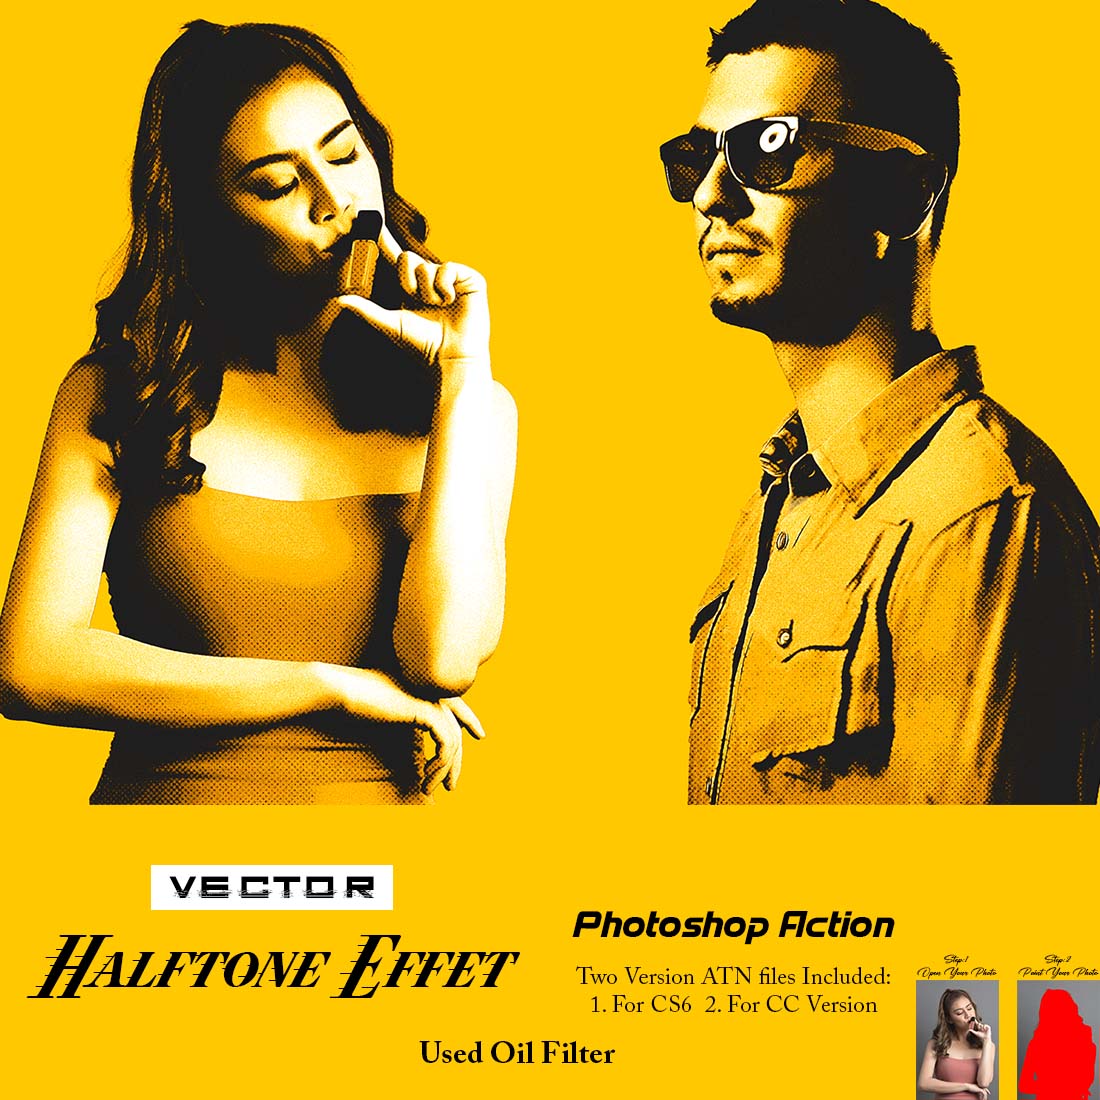 Vector Halftone Effect Photoshop Action cover image.